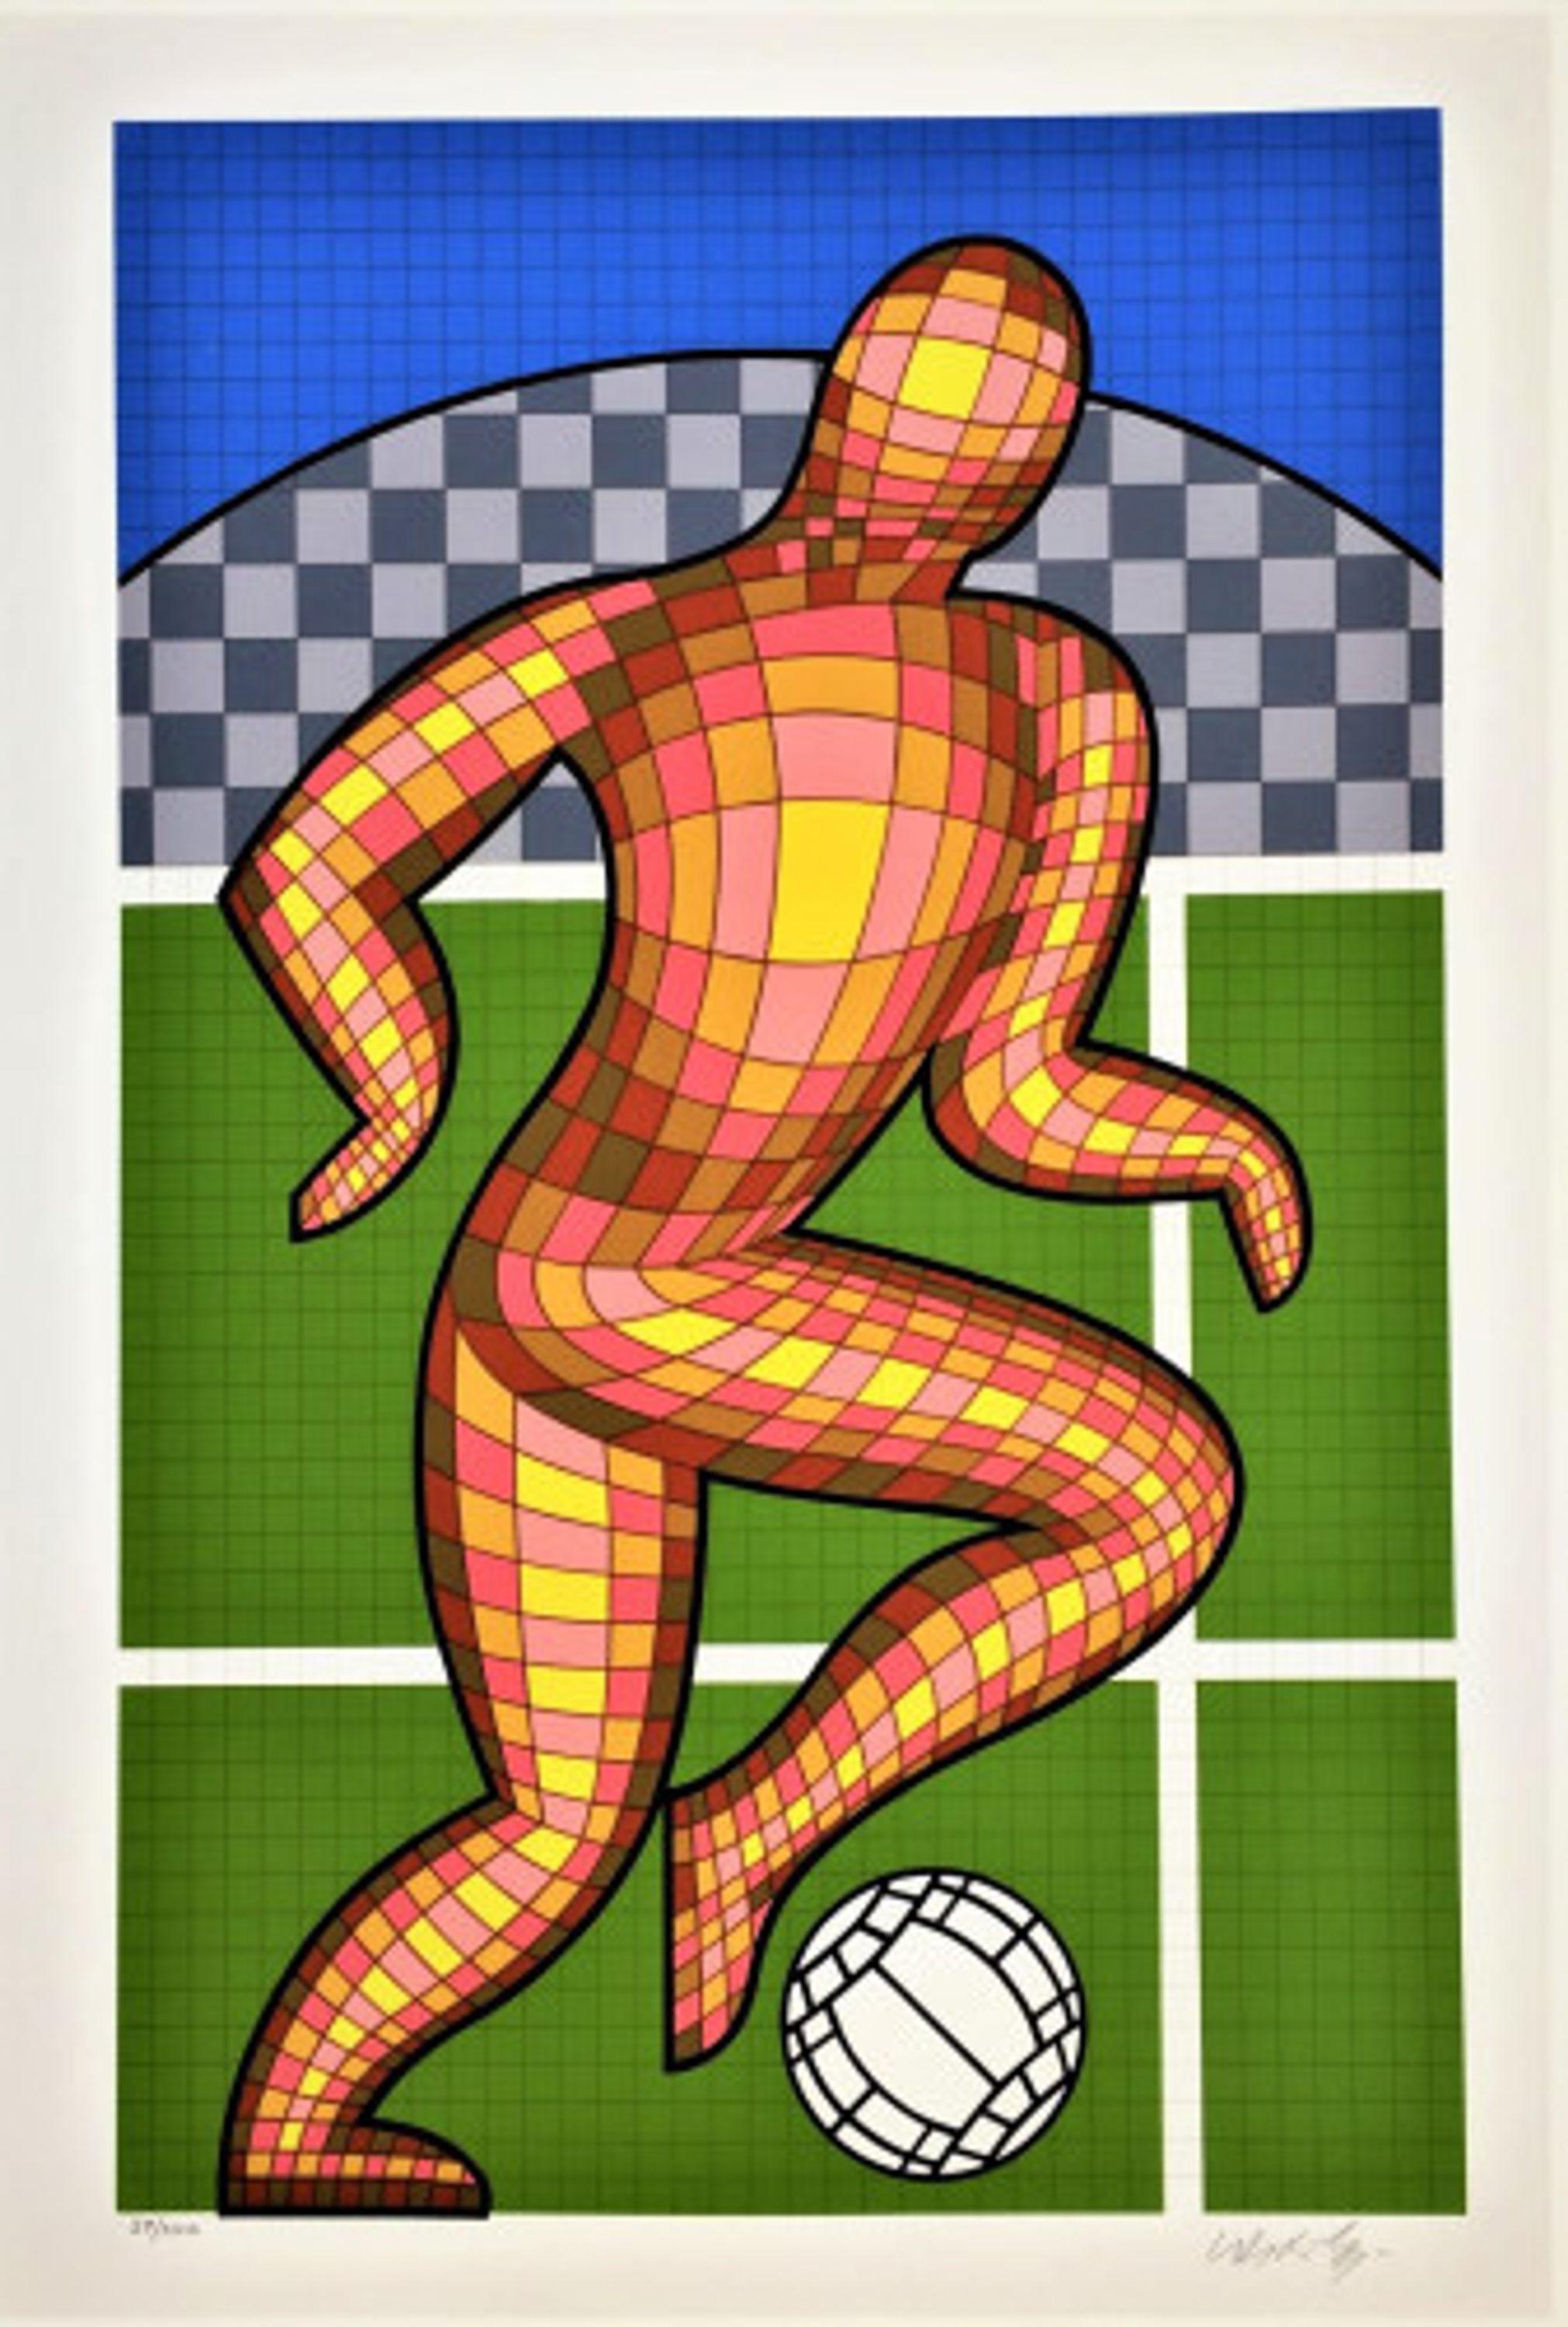 Foot Soccer - Print by Victor Vasarely